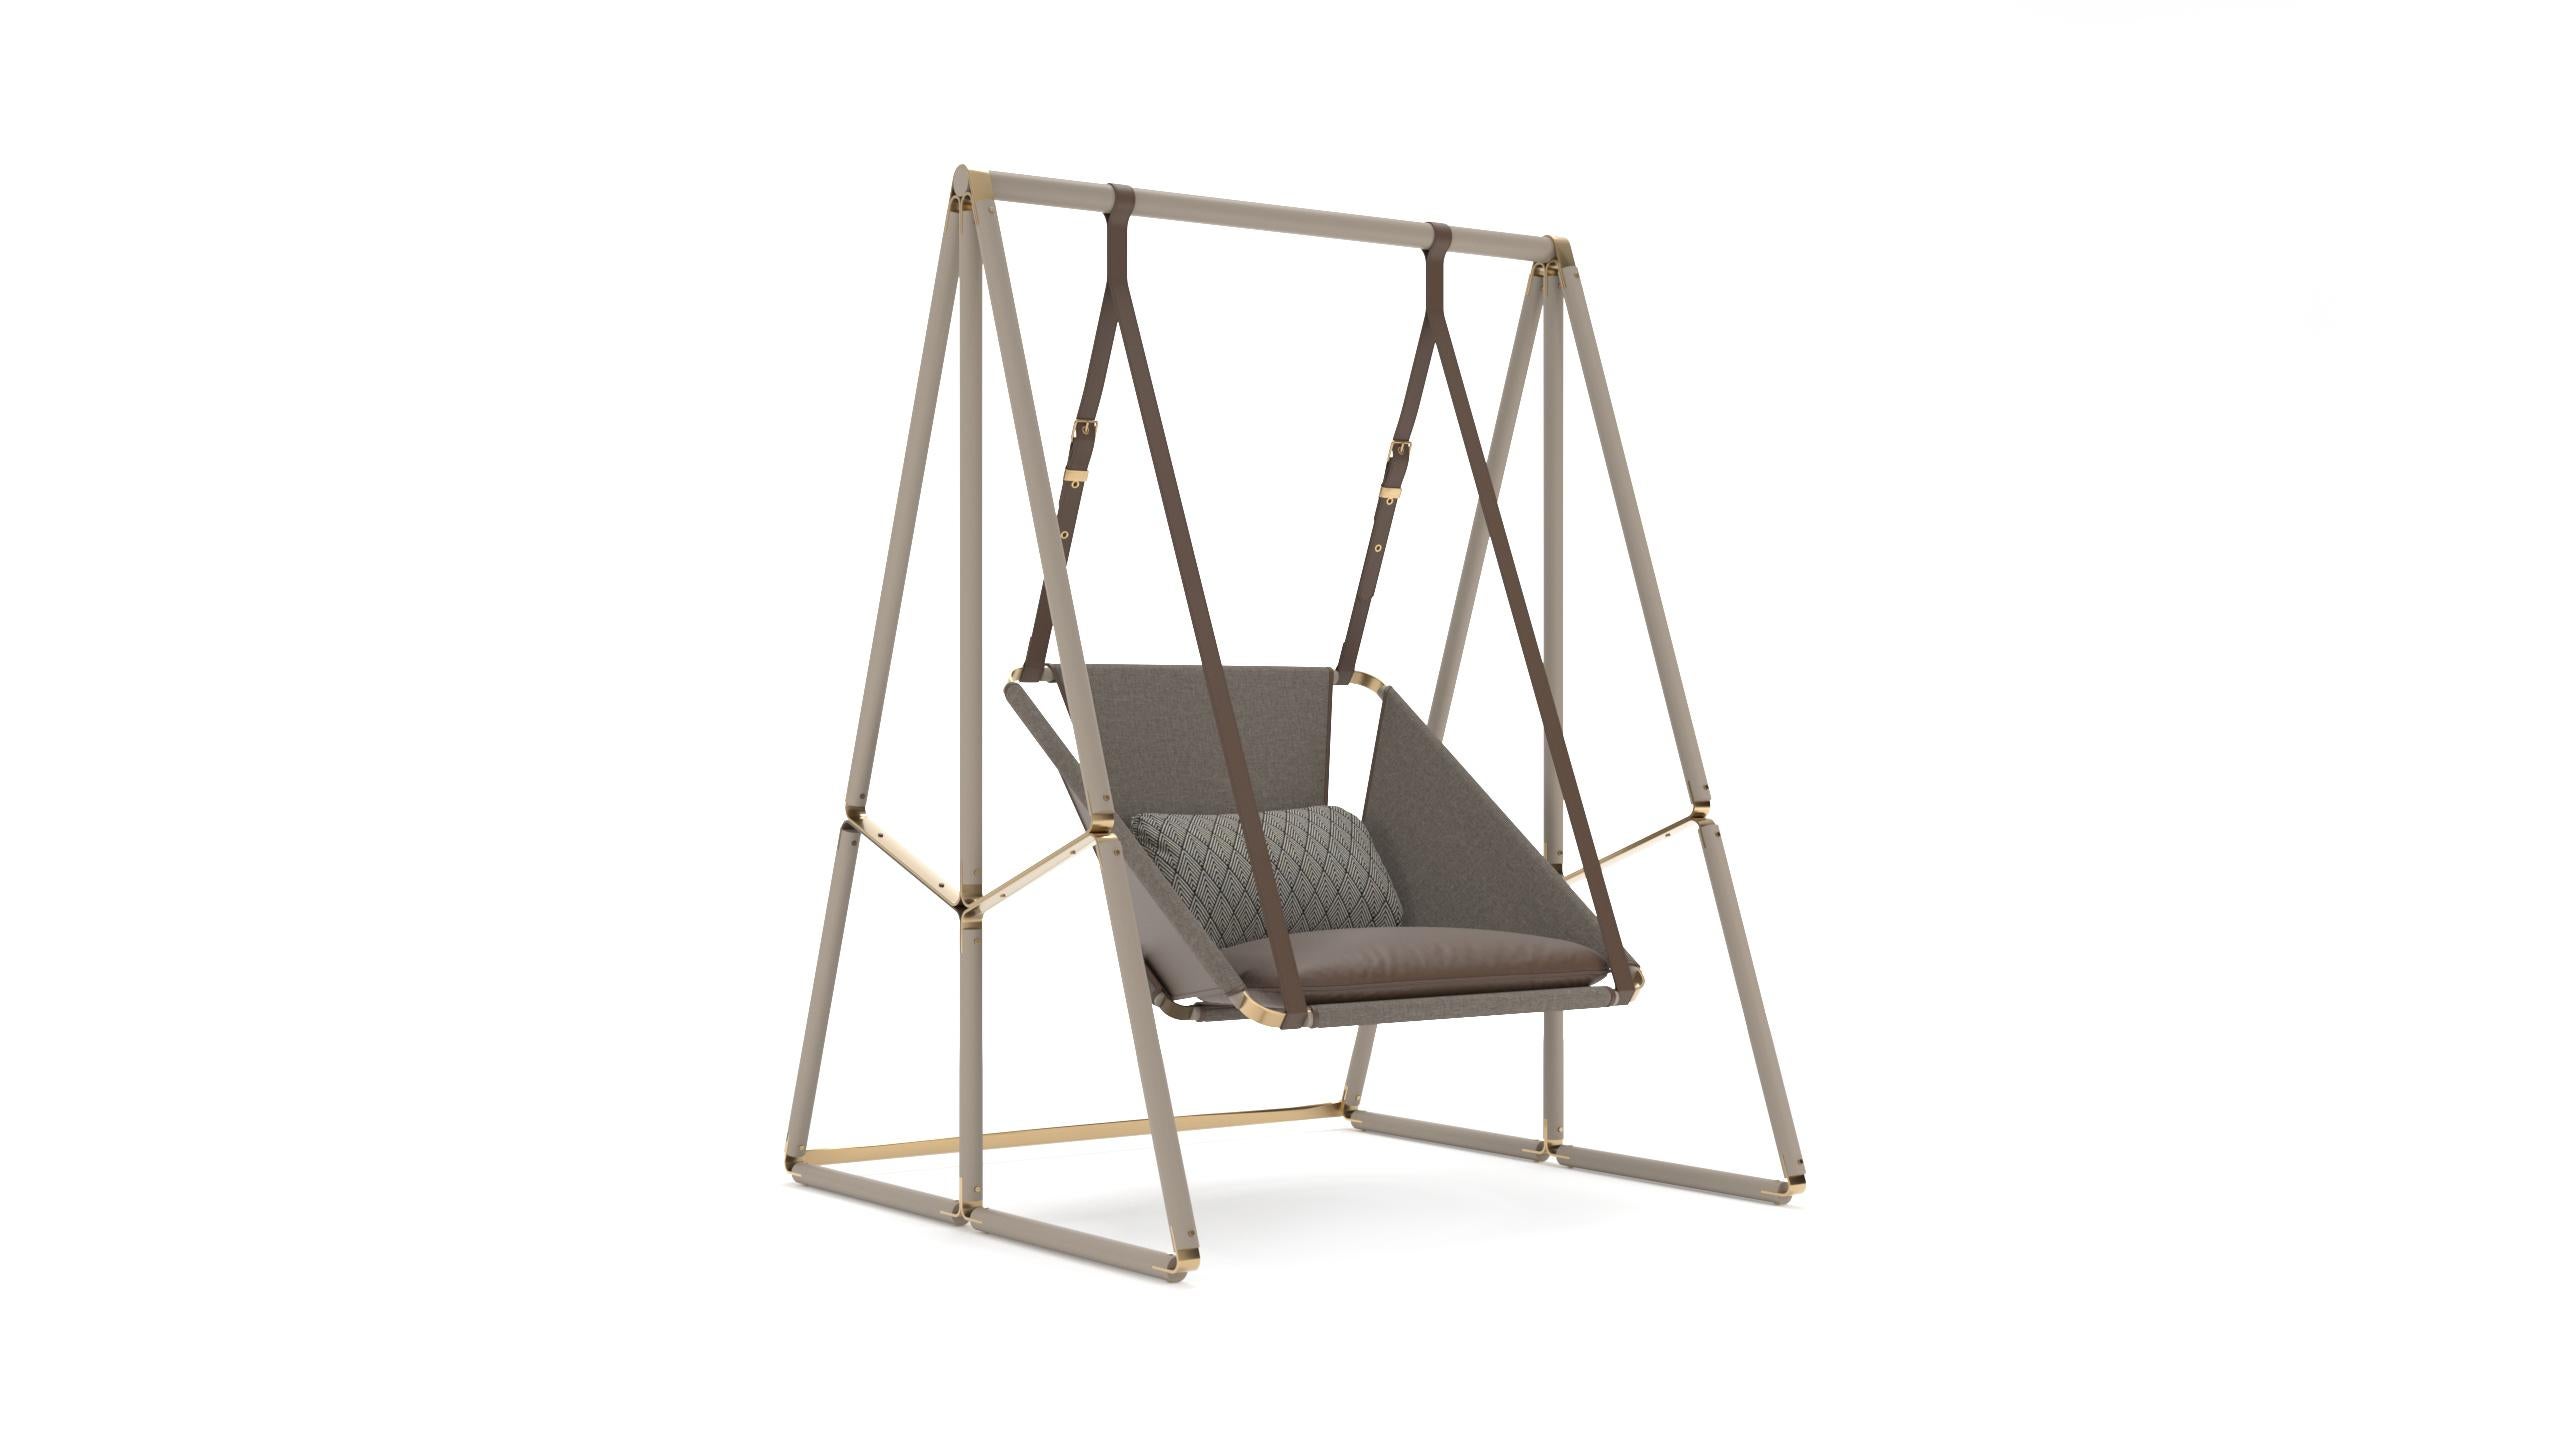 The Allure swing stands out for the combination of its outstanding materials. Plated stainless steel buckles with outdoor leather straps and premium fabrics, result on a swing with a modern design that brings the charm and elegance of the indoors to